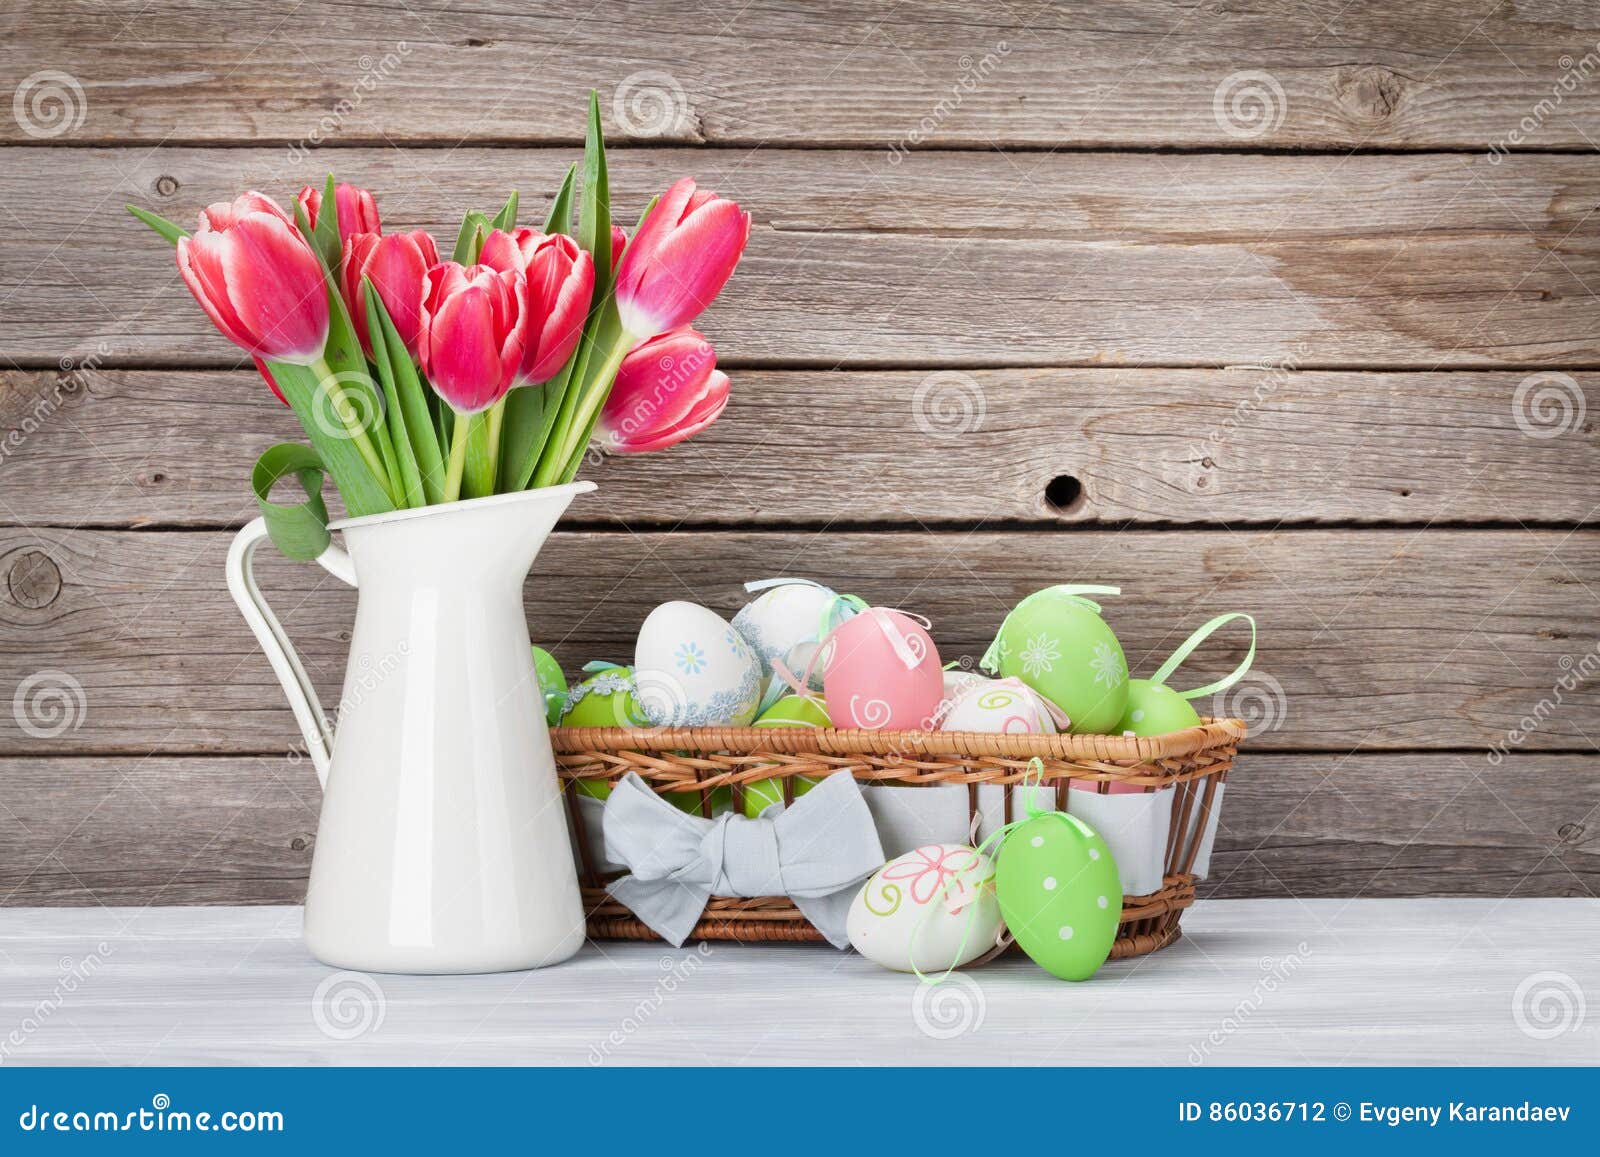 Easter eggs and red tulips stock photo. Image of happy - 86036712